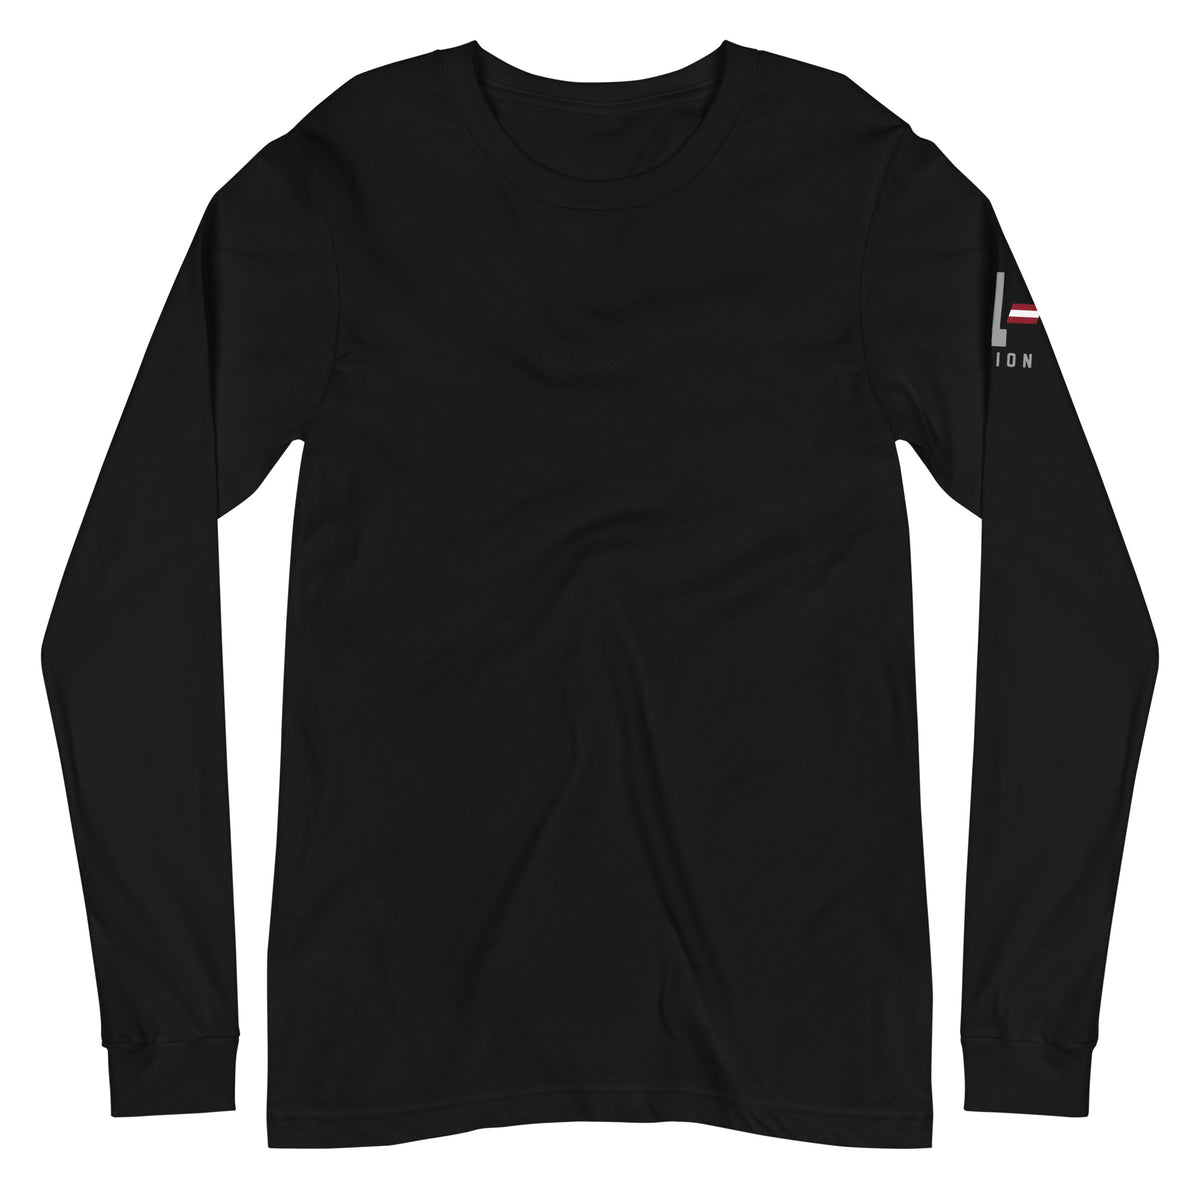 2A: Right of the People Long Sleeve